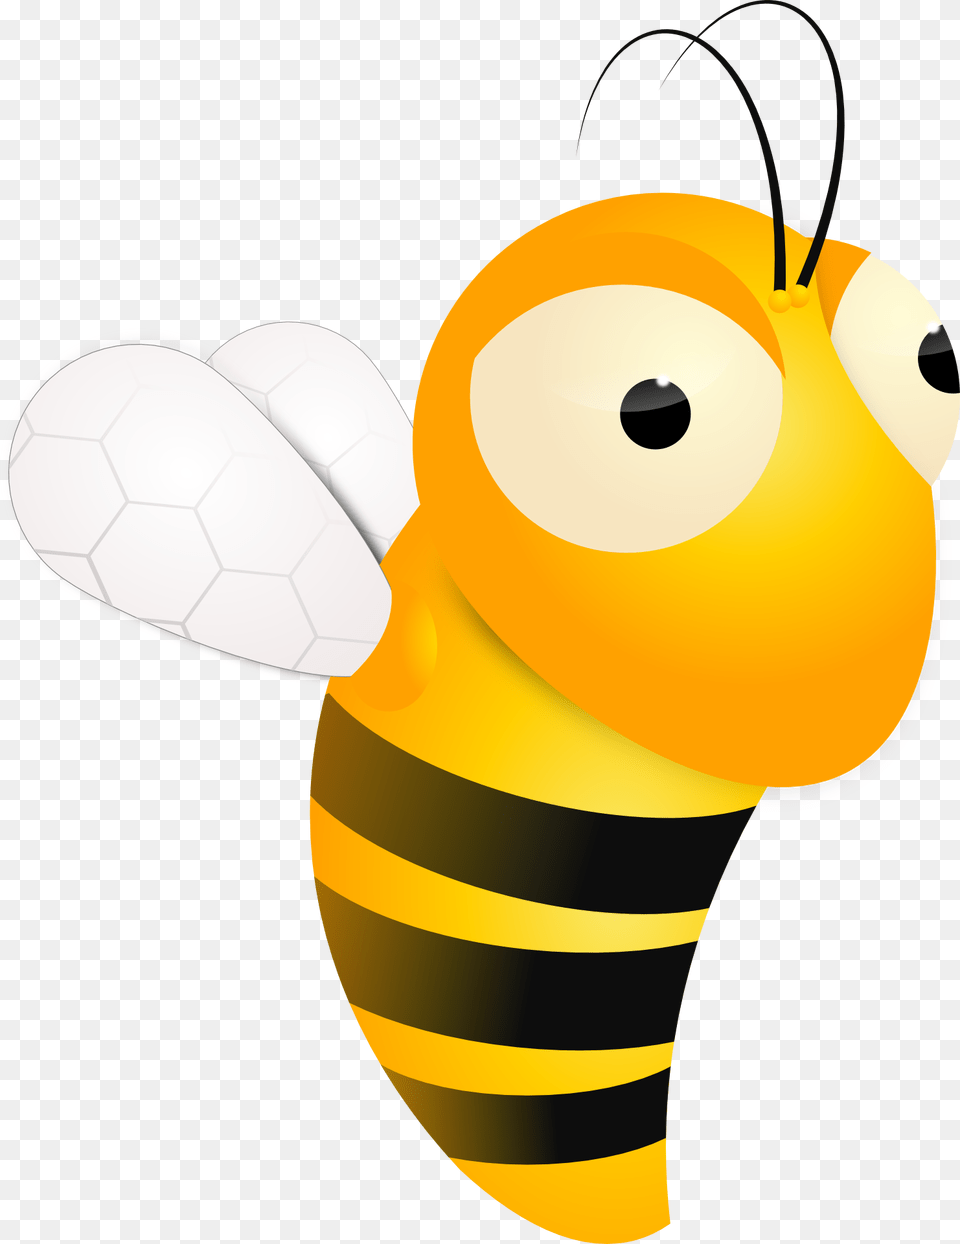 Bumble Bee Transparent Background, Animal, Wasp, Invertebrate, Insect Png